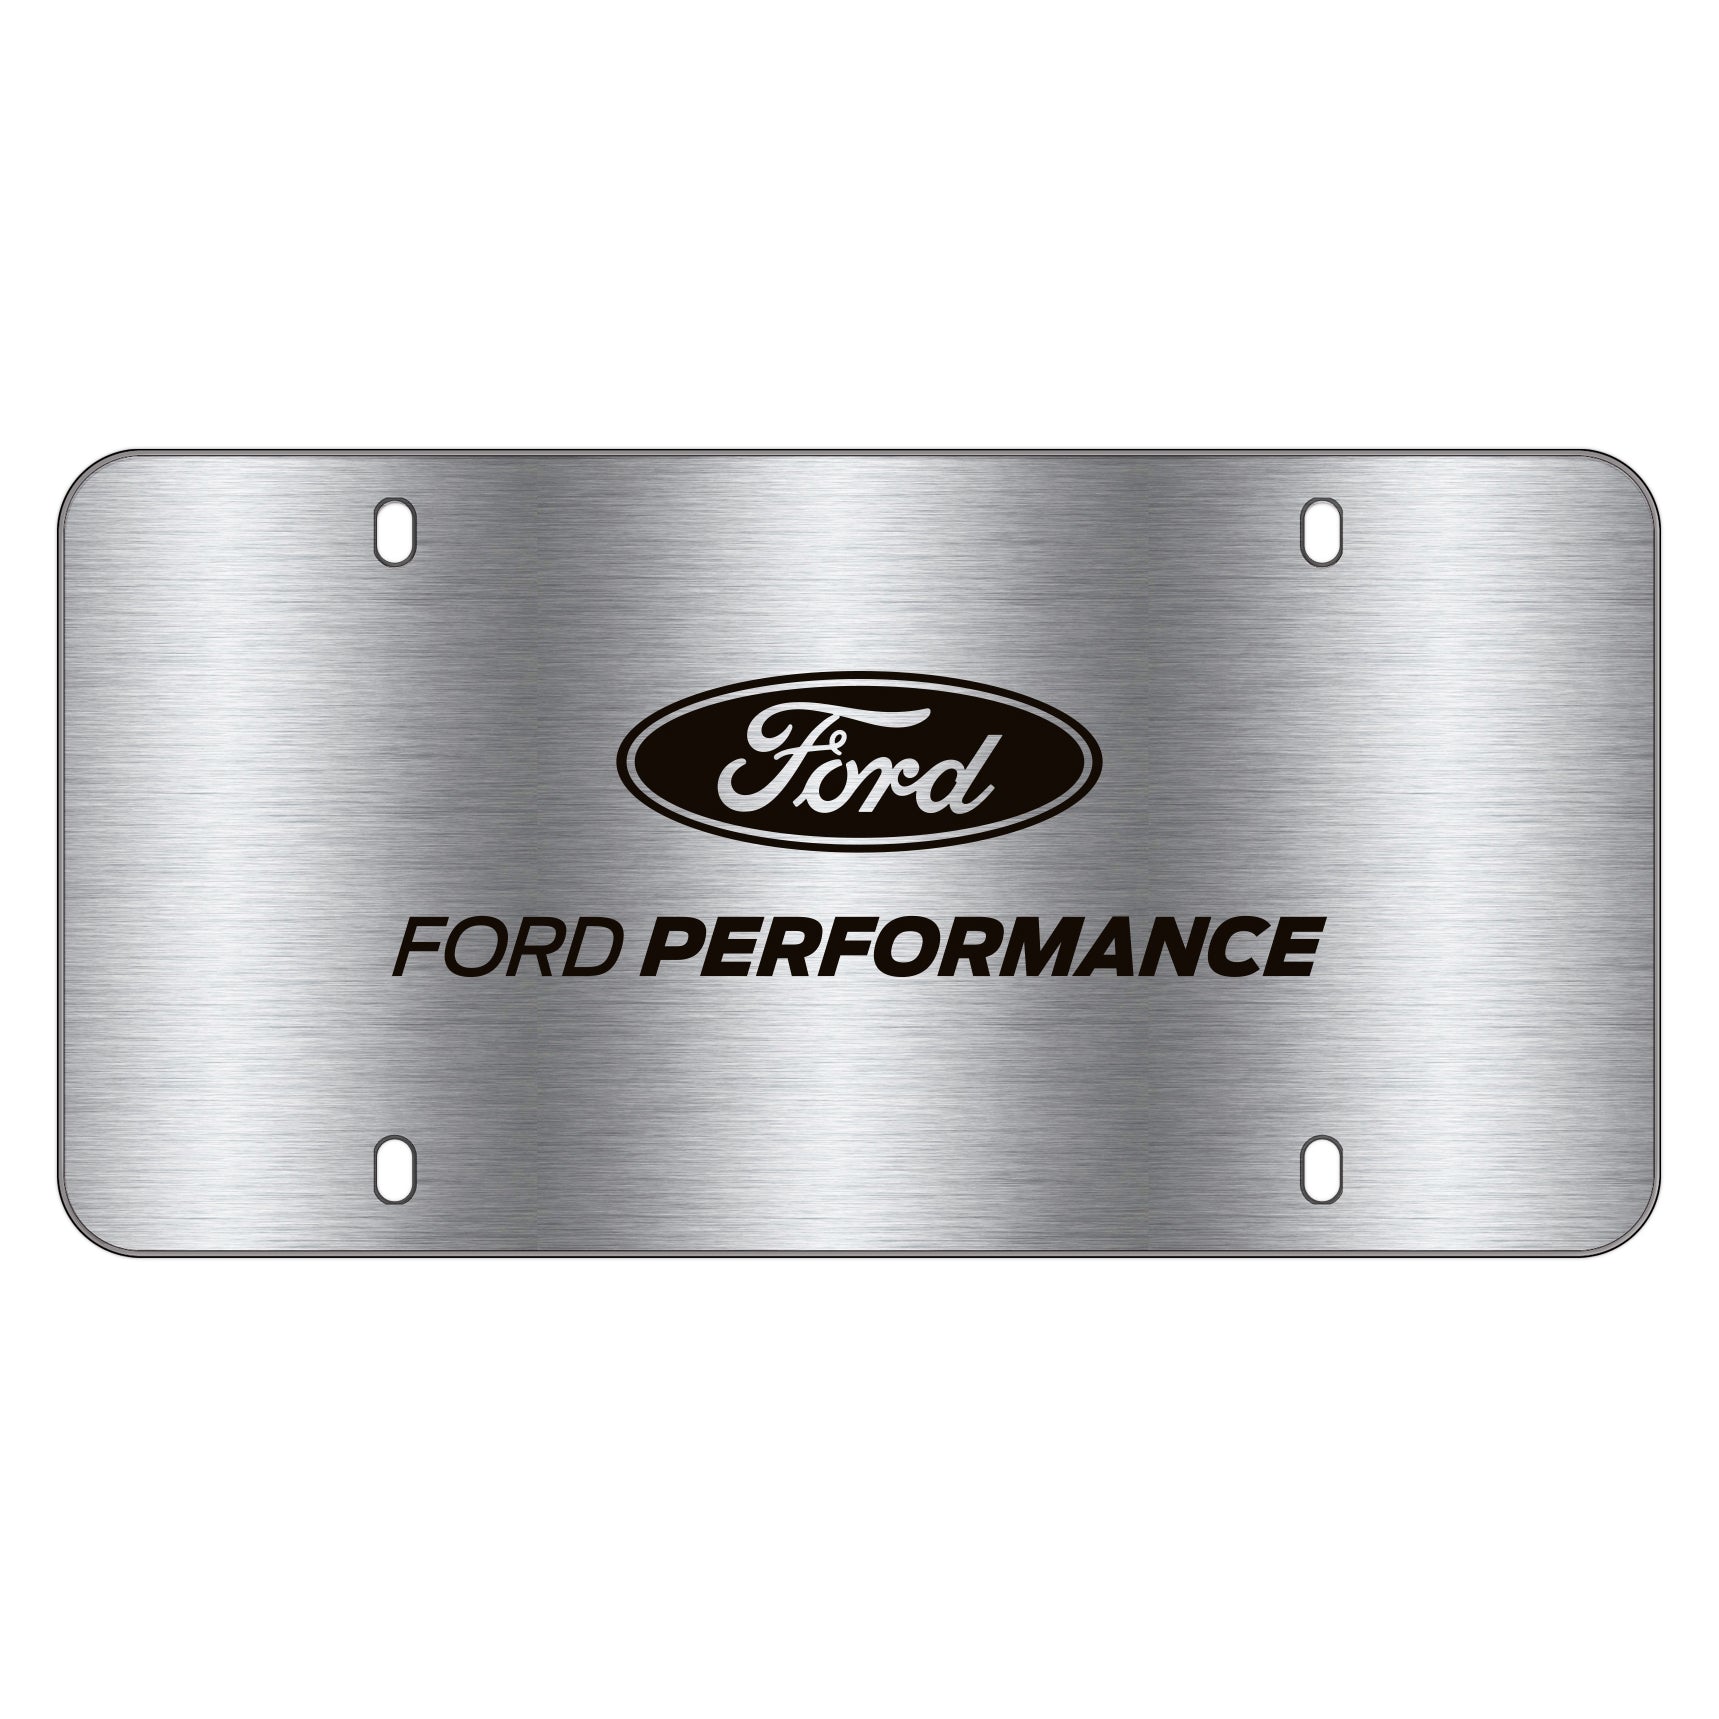 FORD PERFORMANCE STAINLESS STEEL MARQUE PLATE